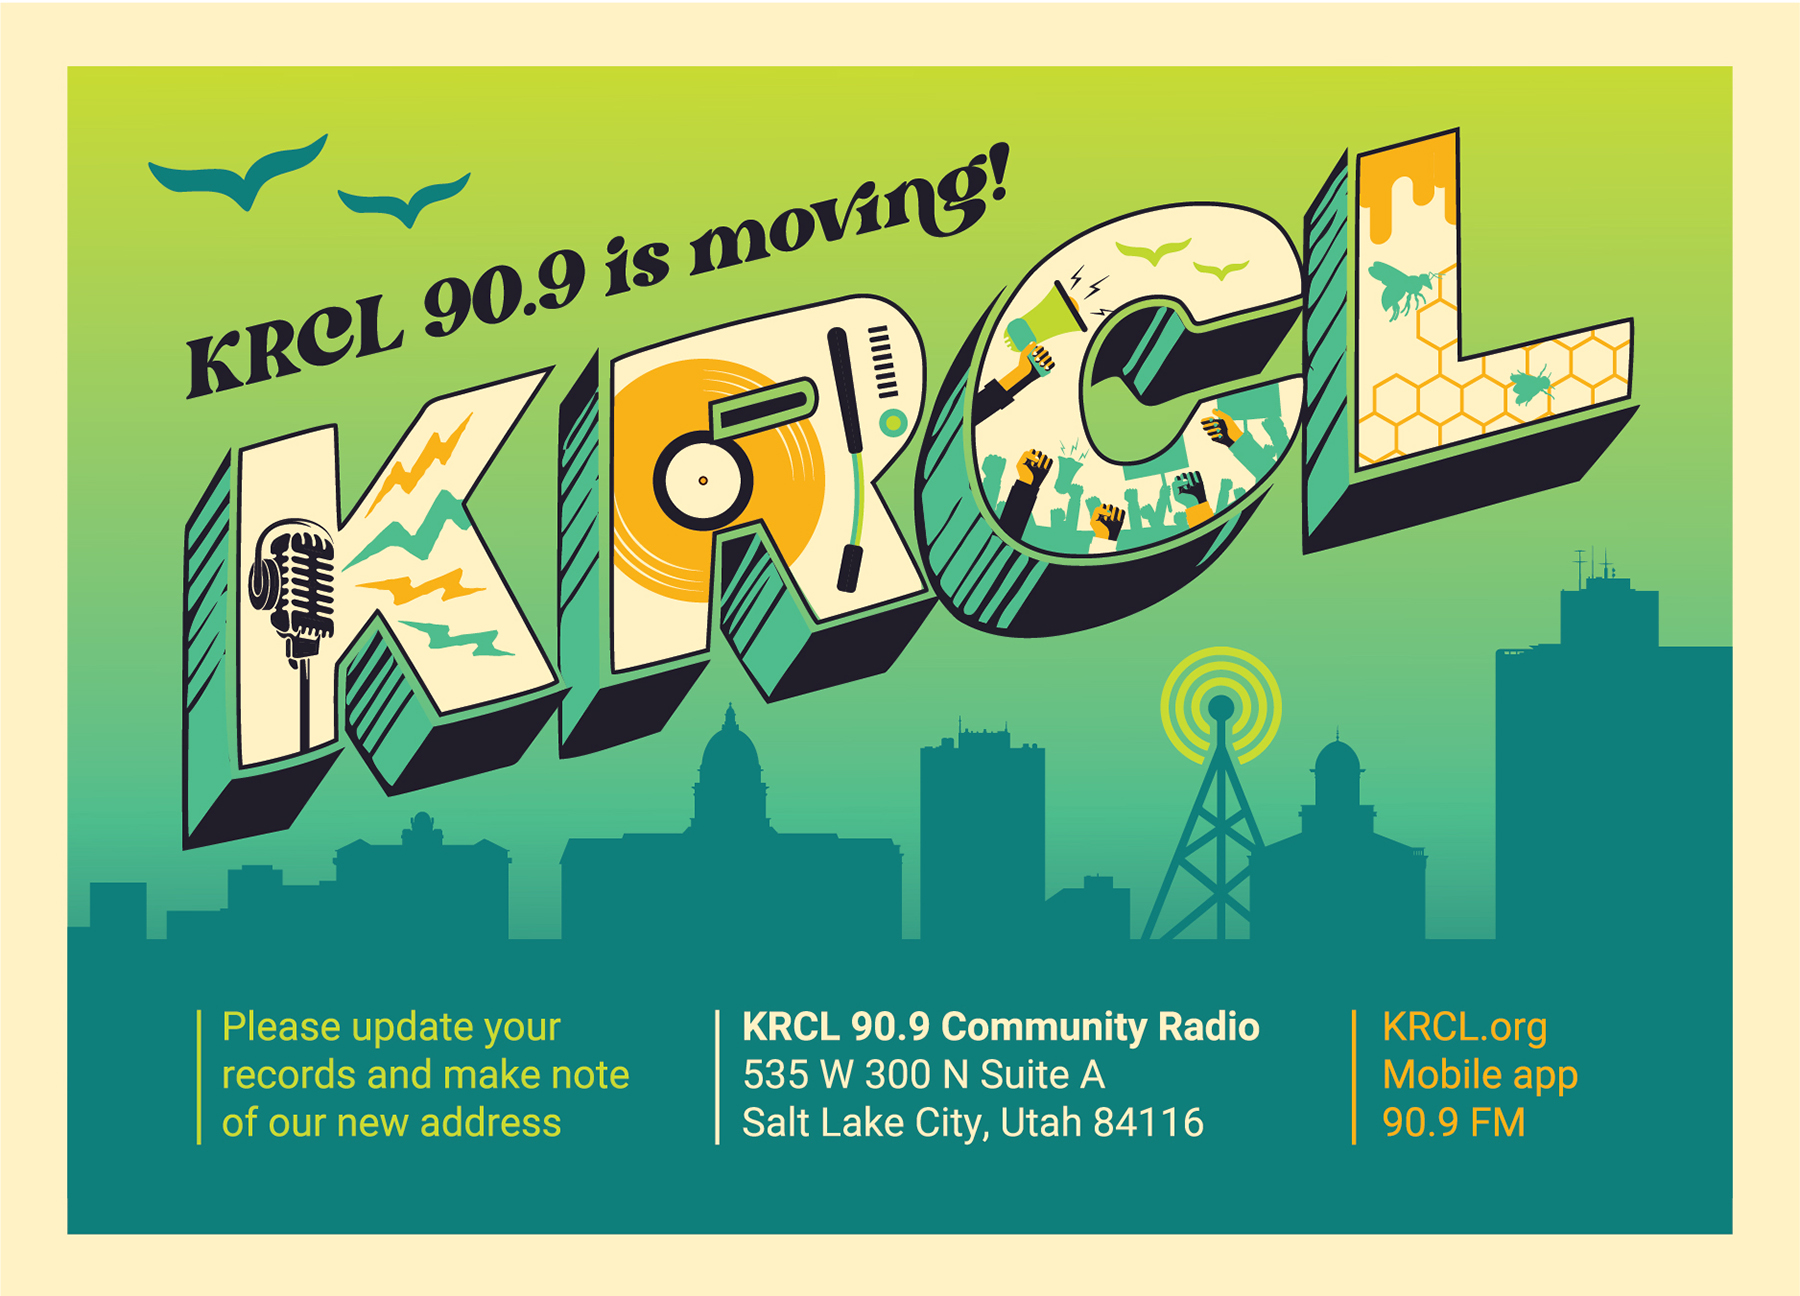 KRCL KRCL is Moving!